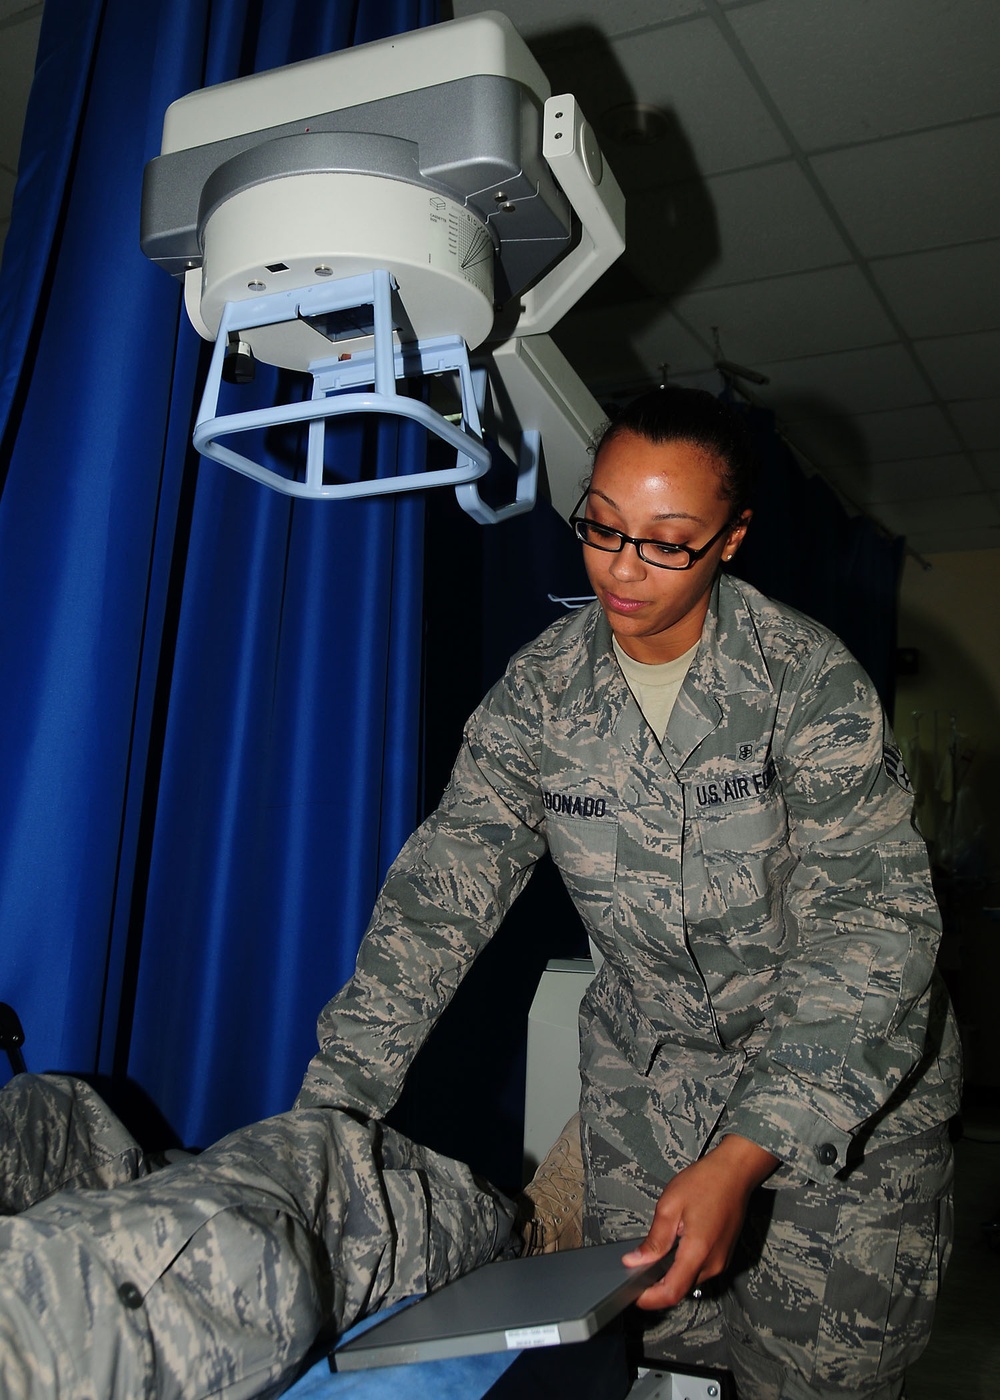 386th EMEDS Takes Care of the Mission With Medical Care